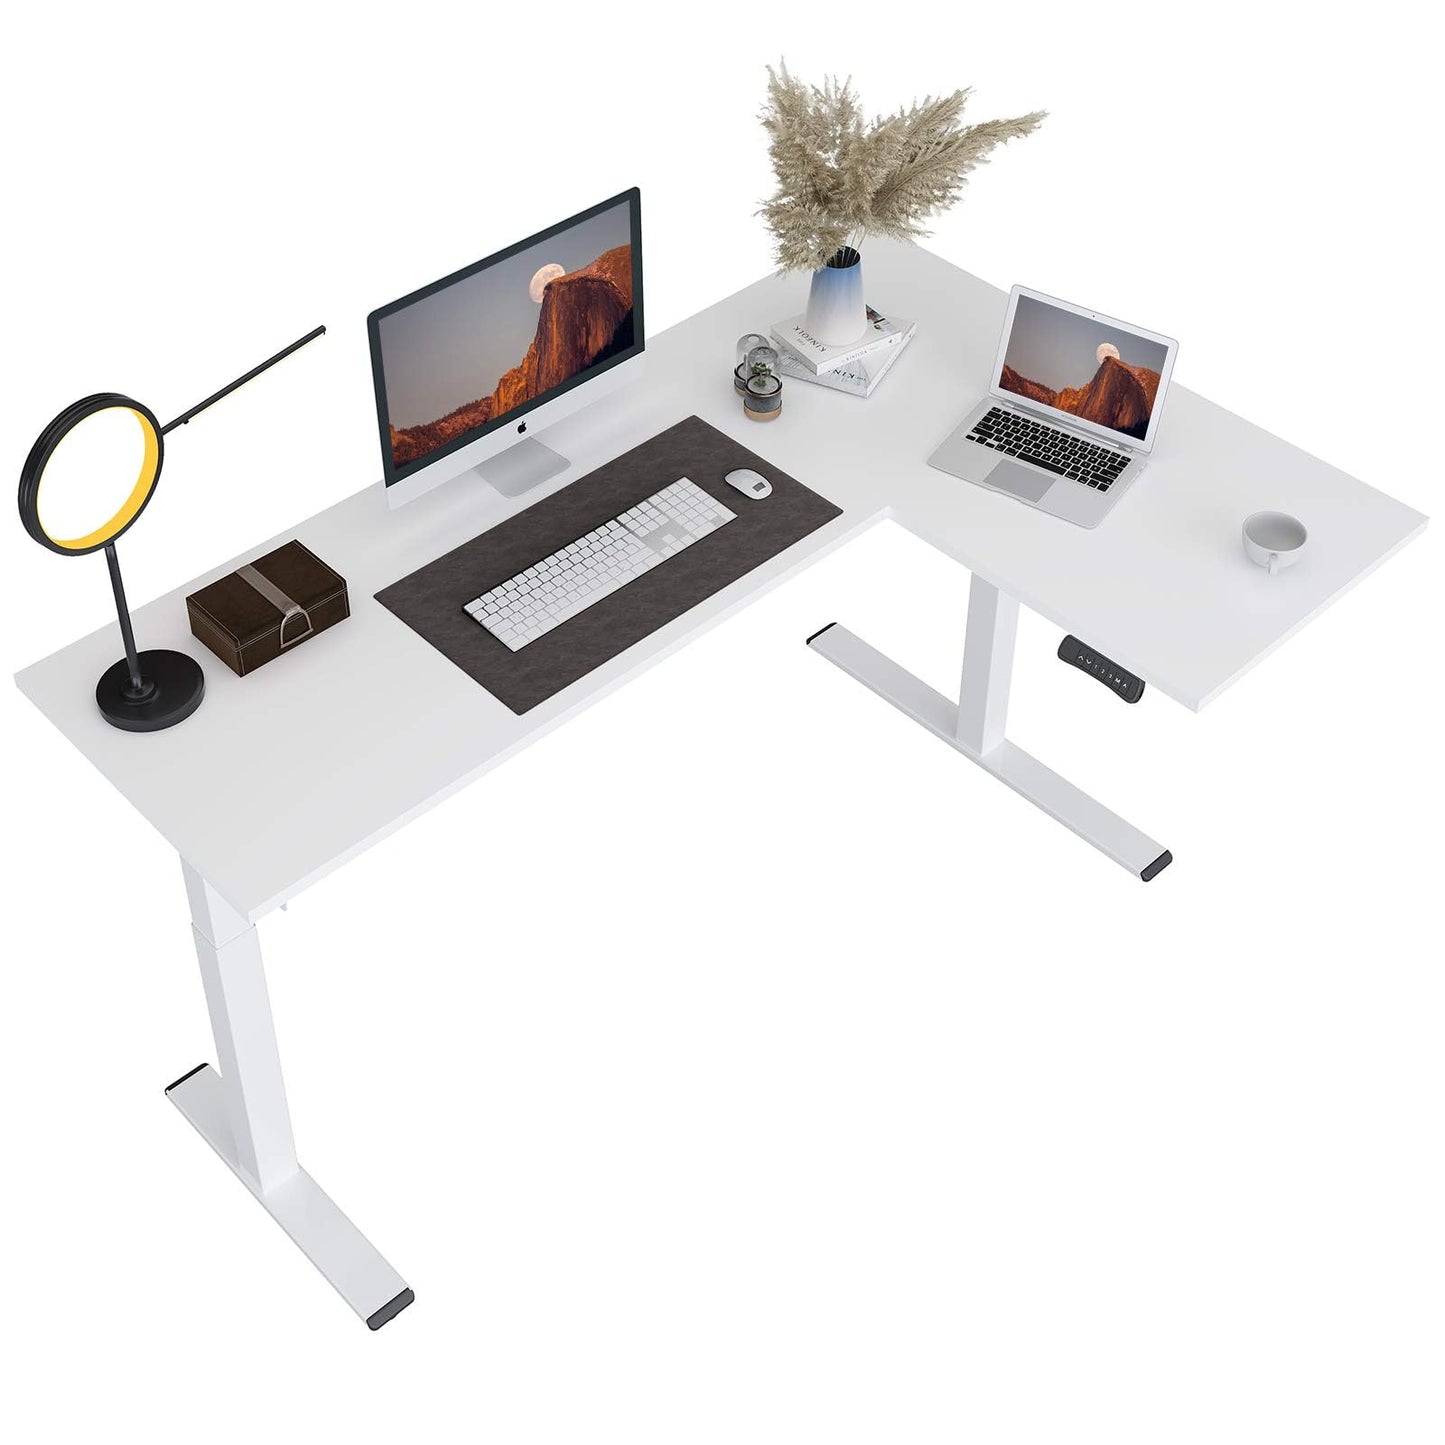 FLEXISPOT Pro Corner Desk Dual Motor L Shaped Computer Electric Standing Desk Sit Stand Up Desk Height Adjustable White Desk Home Office Table with